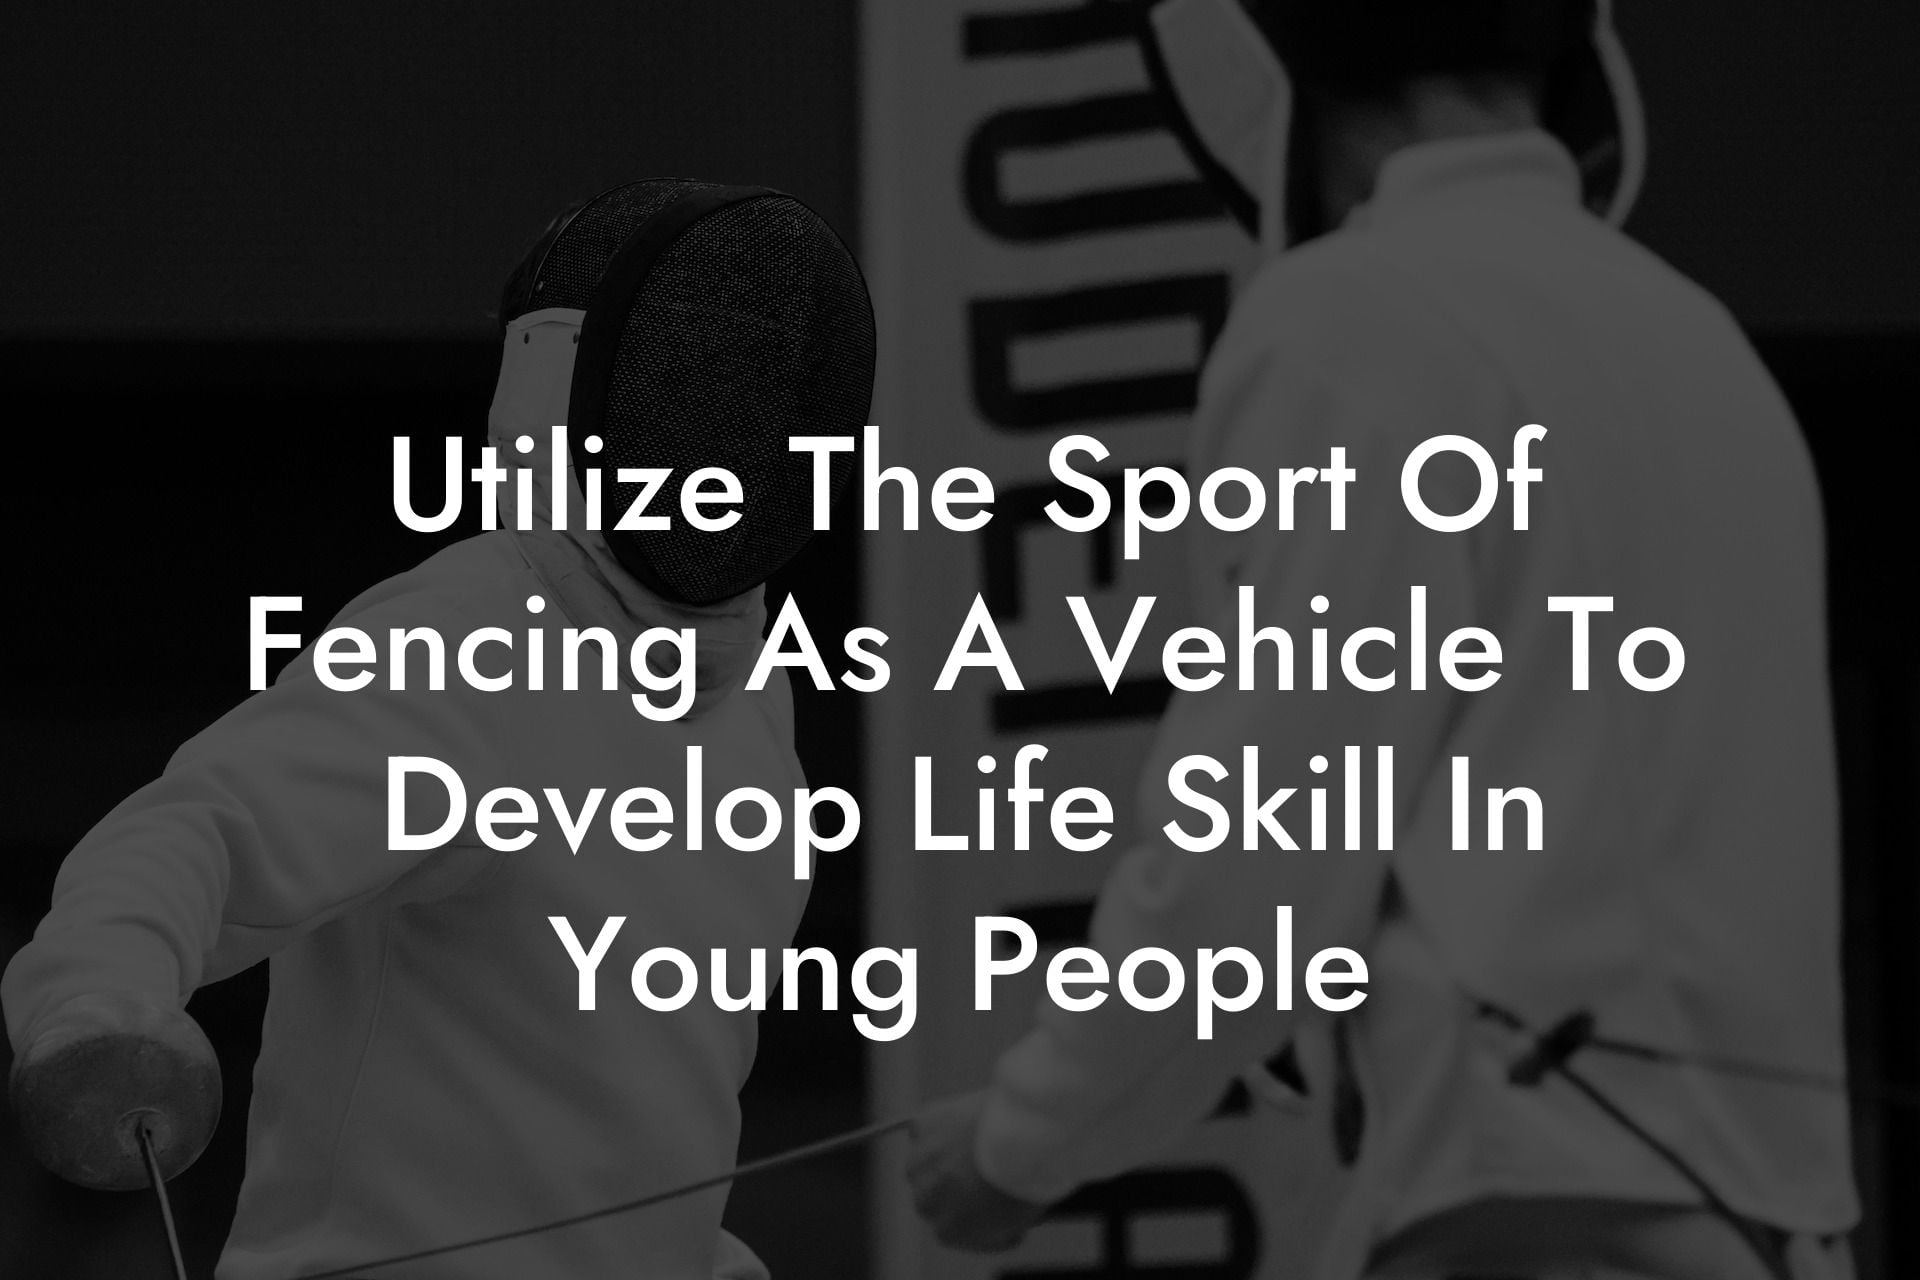 Utilize The Sport Of Fencing As A Vehicle To Develop Life Skill In Young People